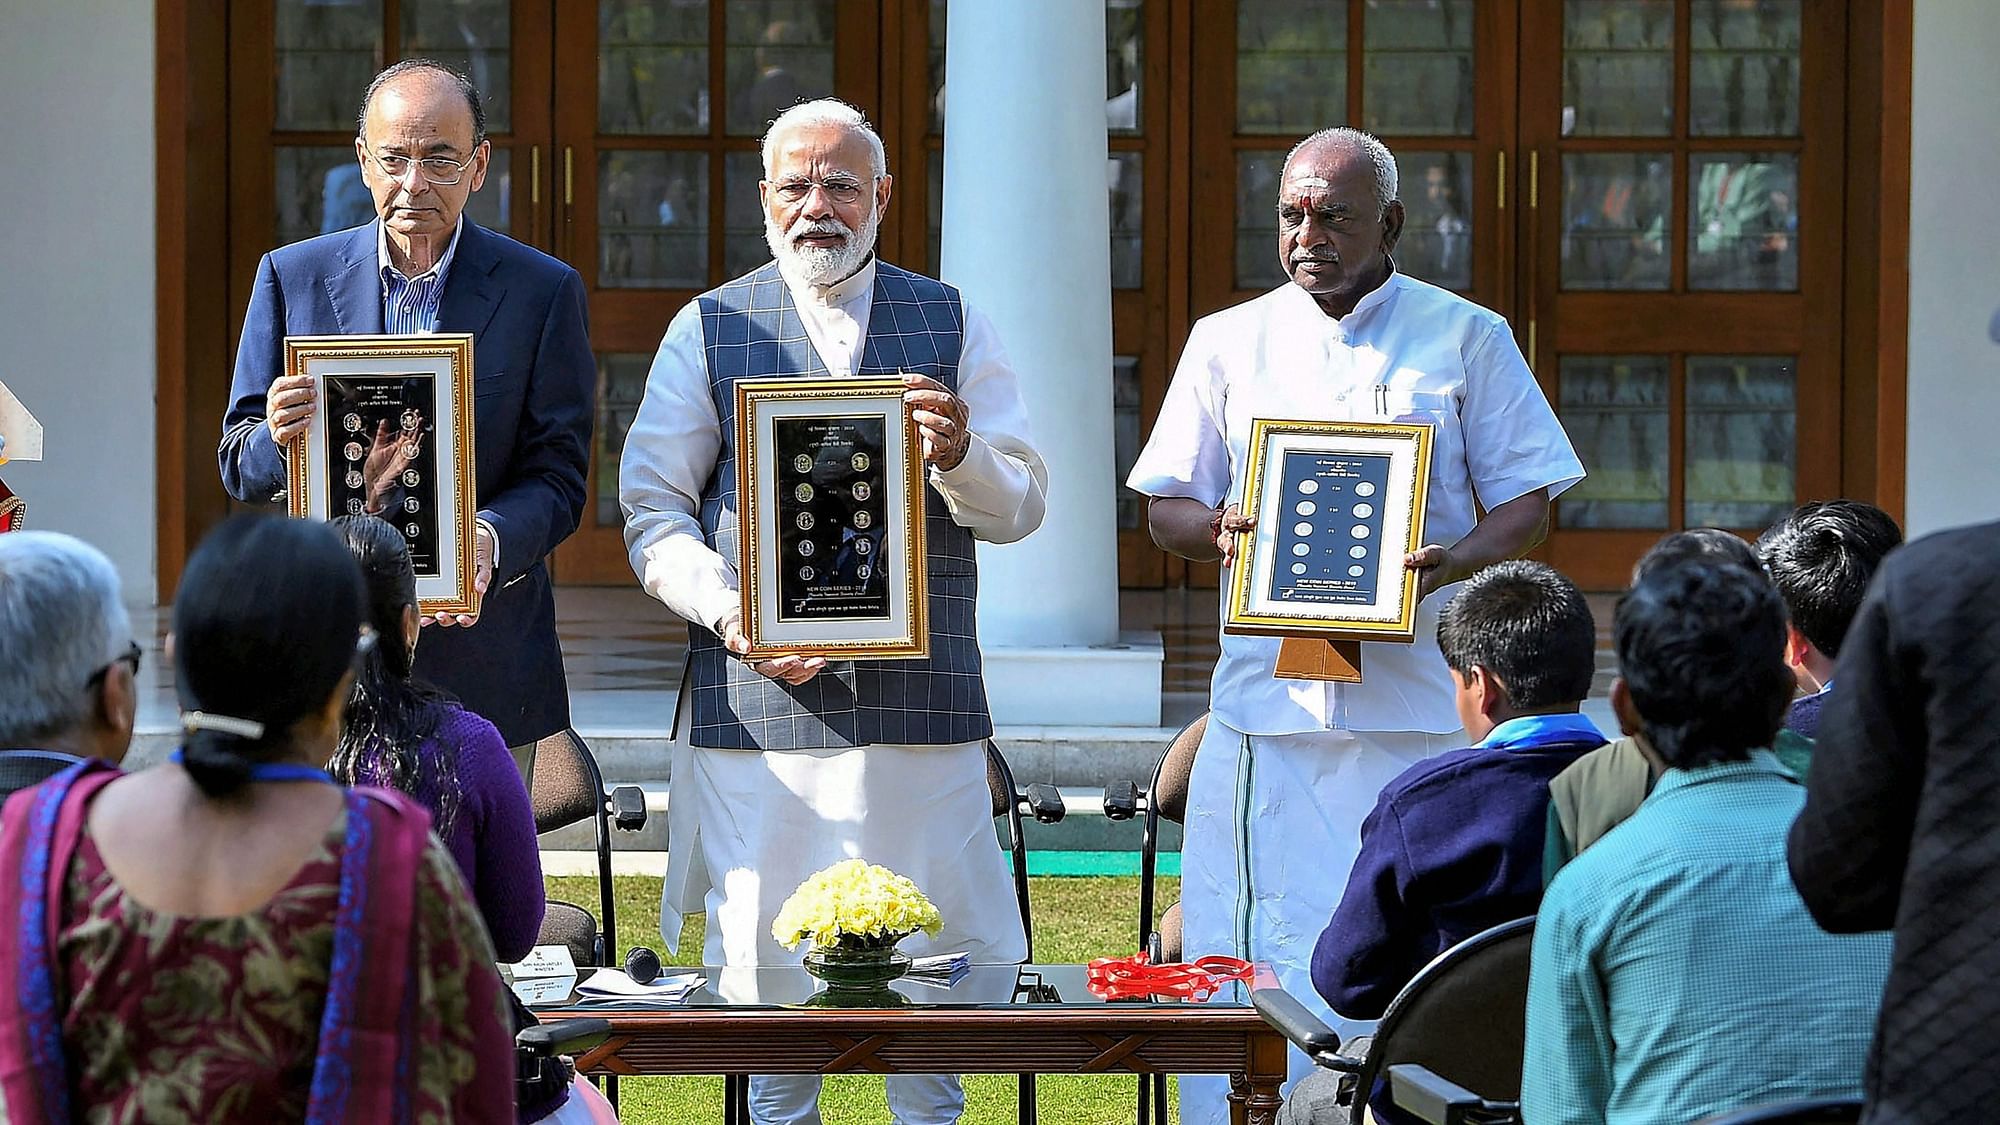 Prime Minister Narendra Modi releases the new series of visually impaired-friendly circulation coins at a function in New Delhi.